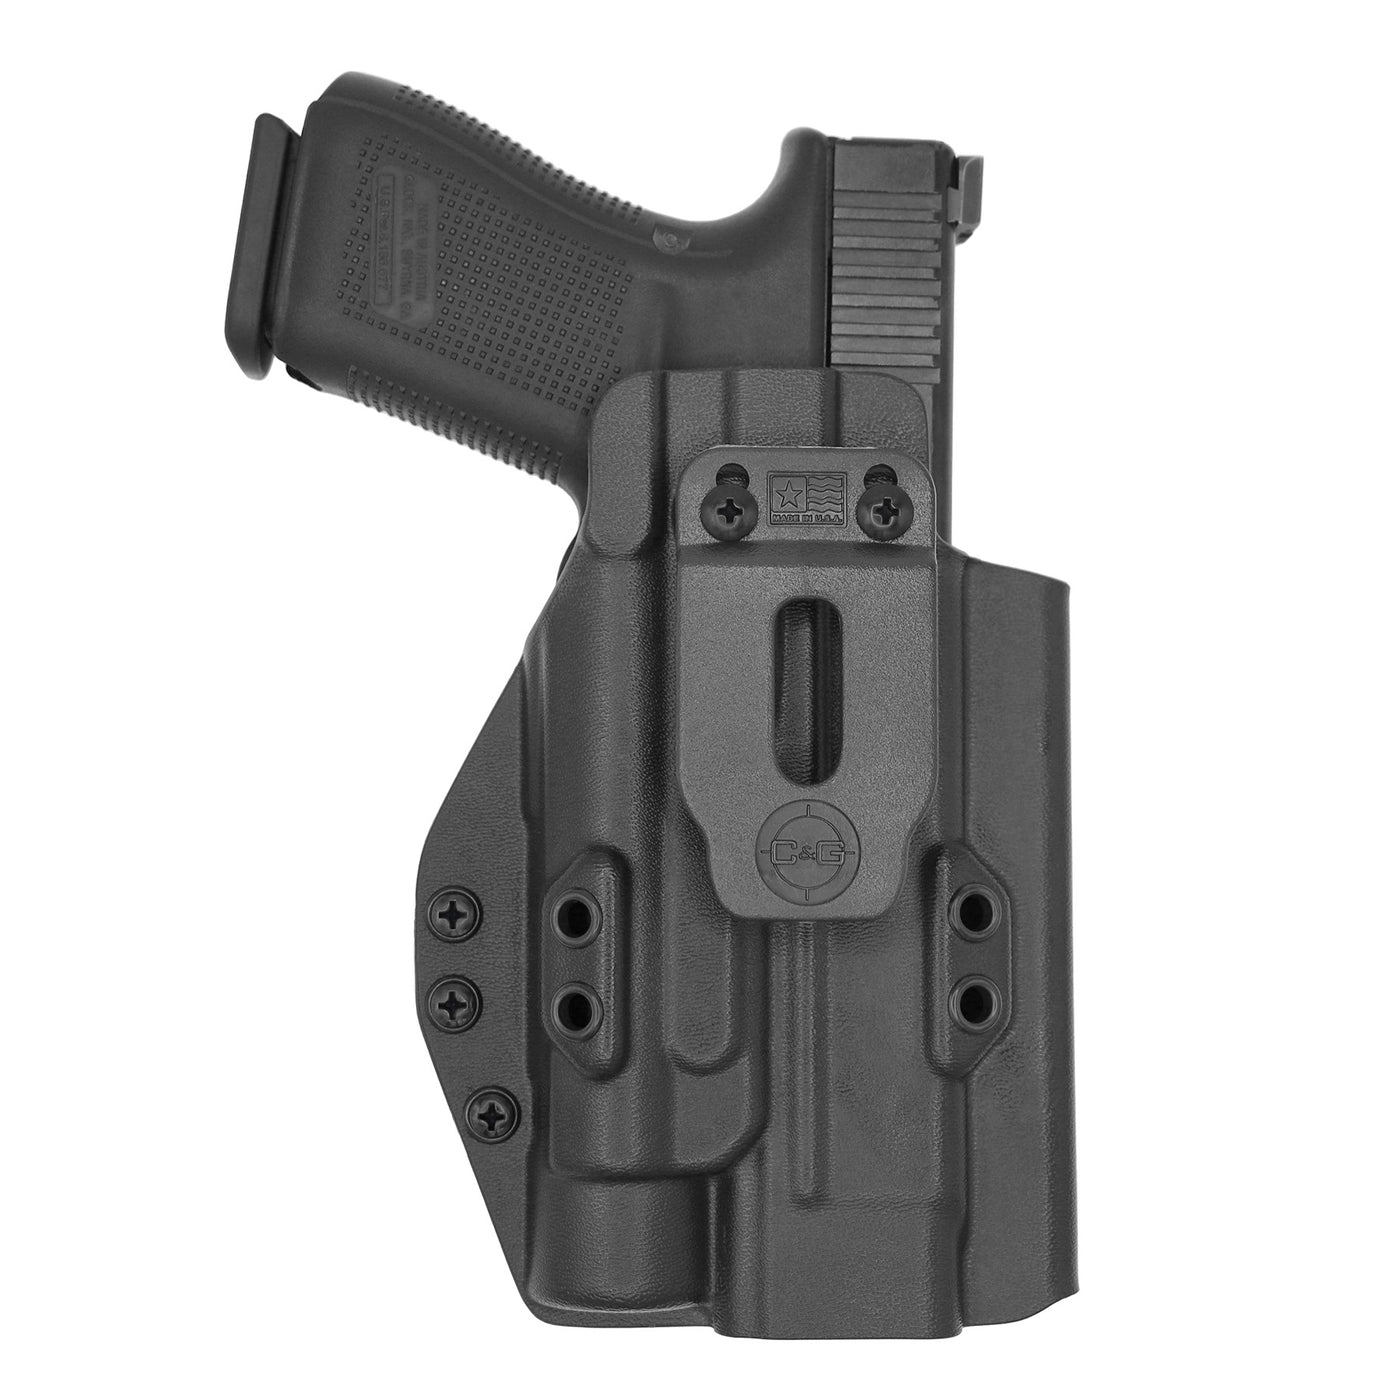 C&G Holsters quickship IWB Tactical Glock 20/21 Streamlight TLR1 in holstered position